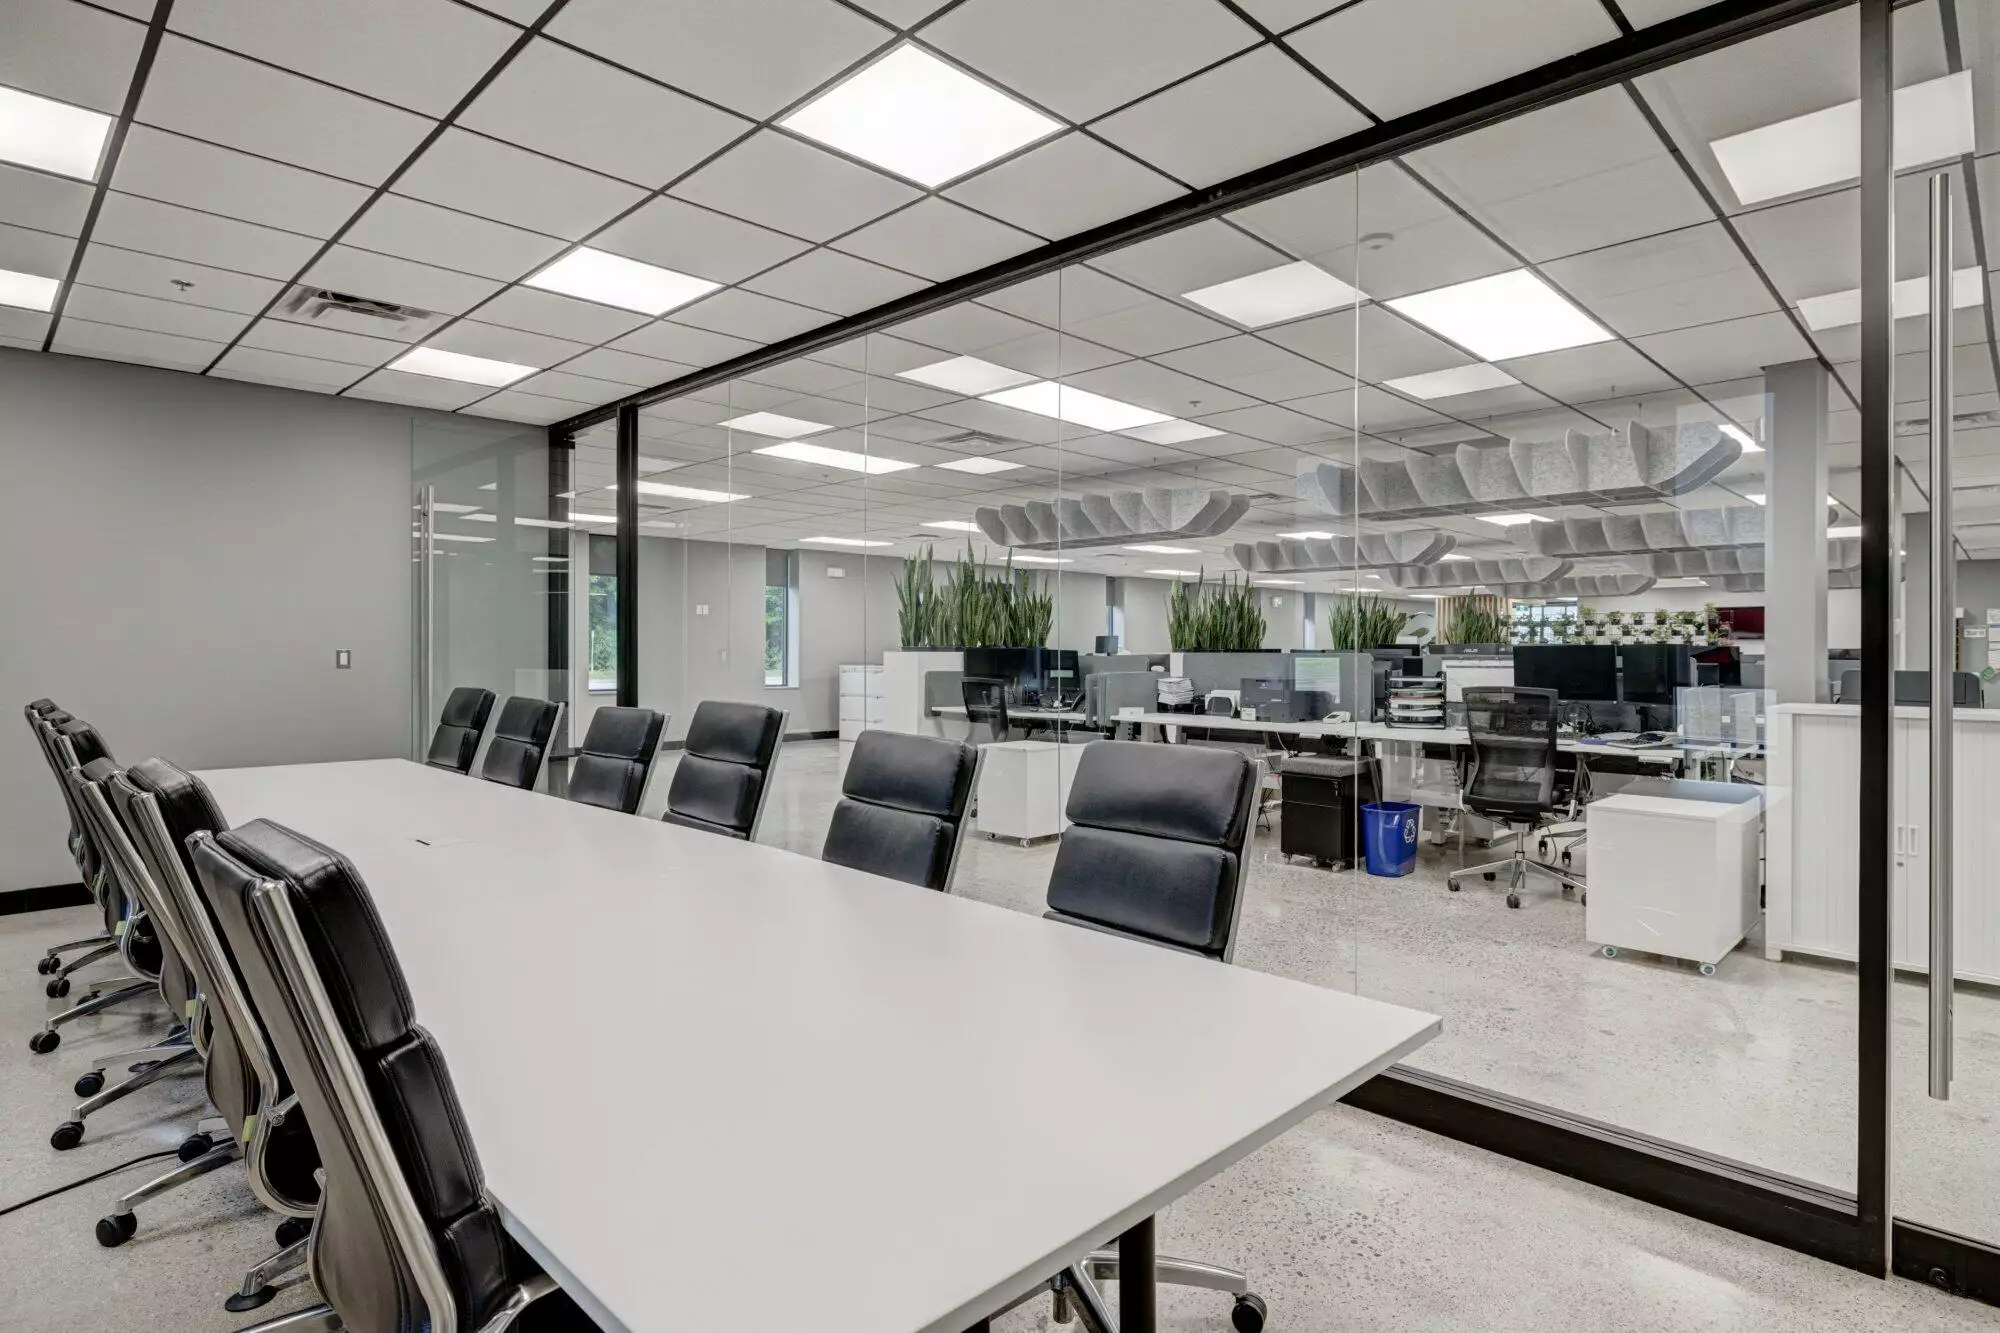 Modern office interior with a long conference table, black chairs, glass partitions, and multiple workstations in the background.